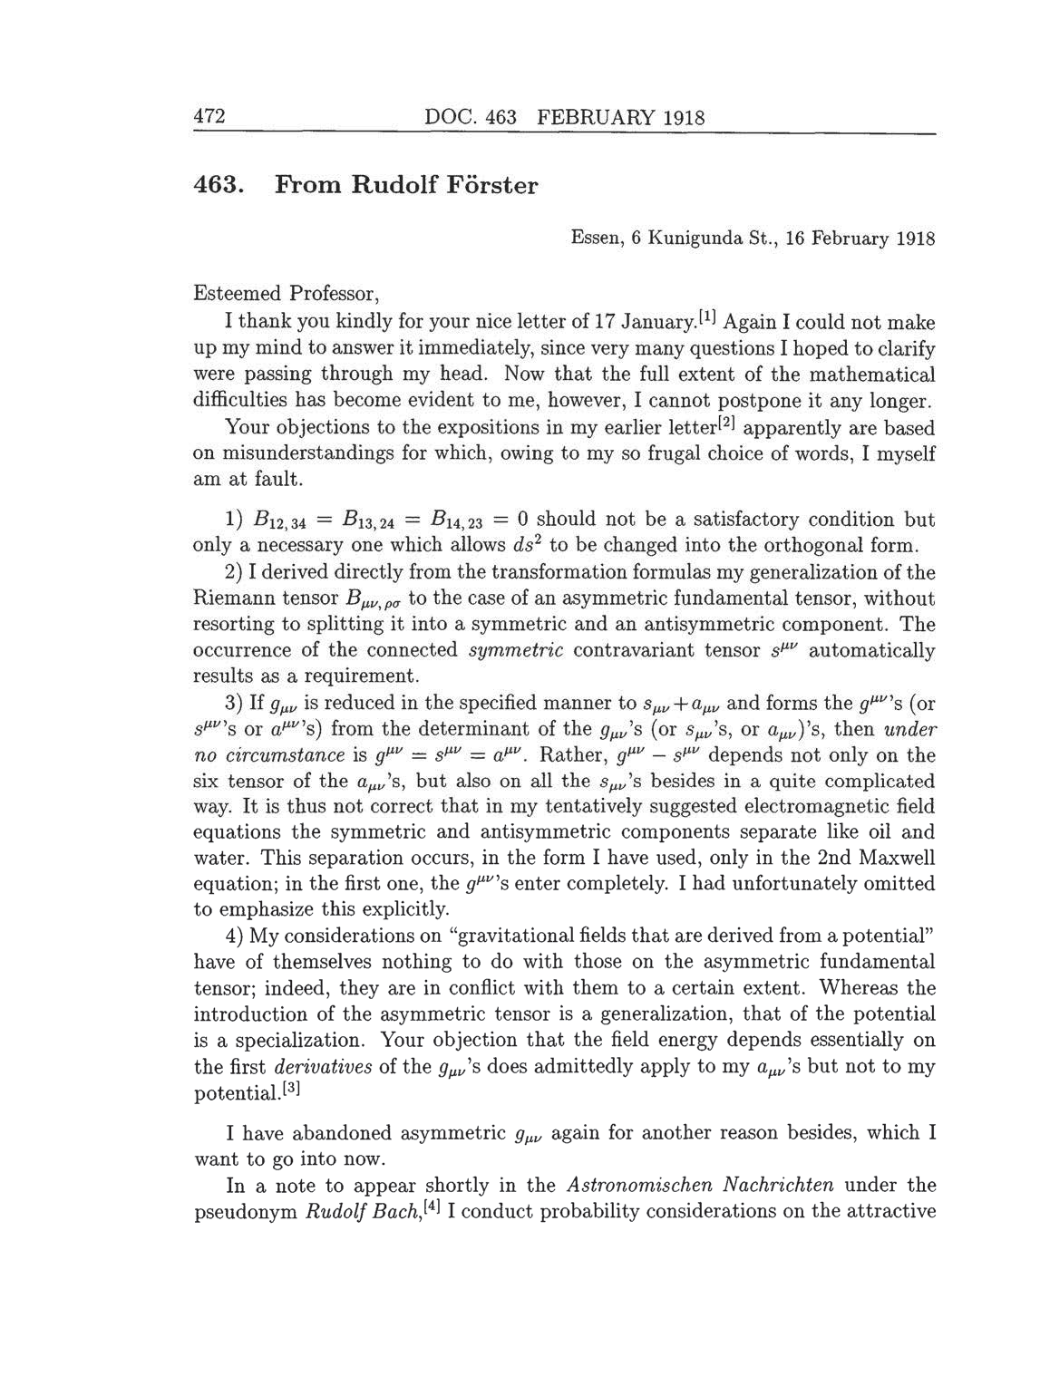 Volume 8: The Berlin Years: Correspondence, 1914-1918 (English translation supplement) page 472